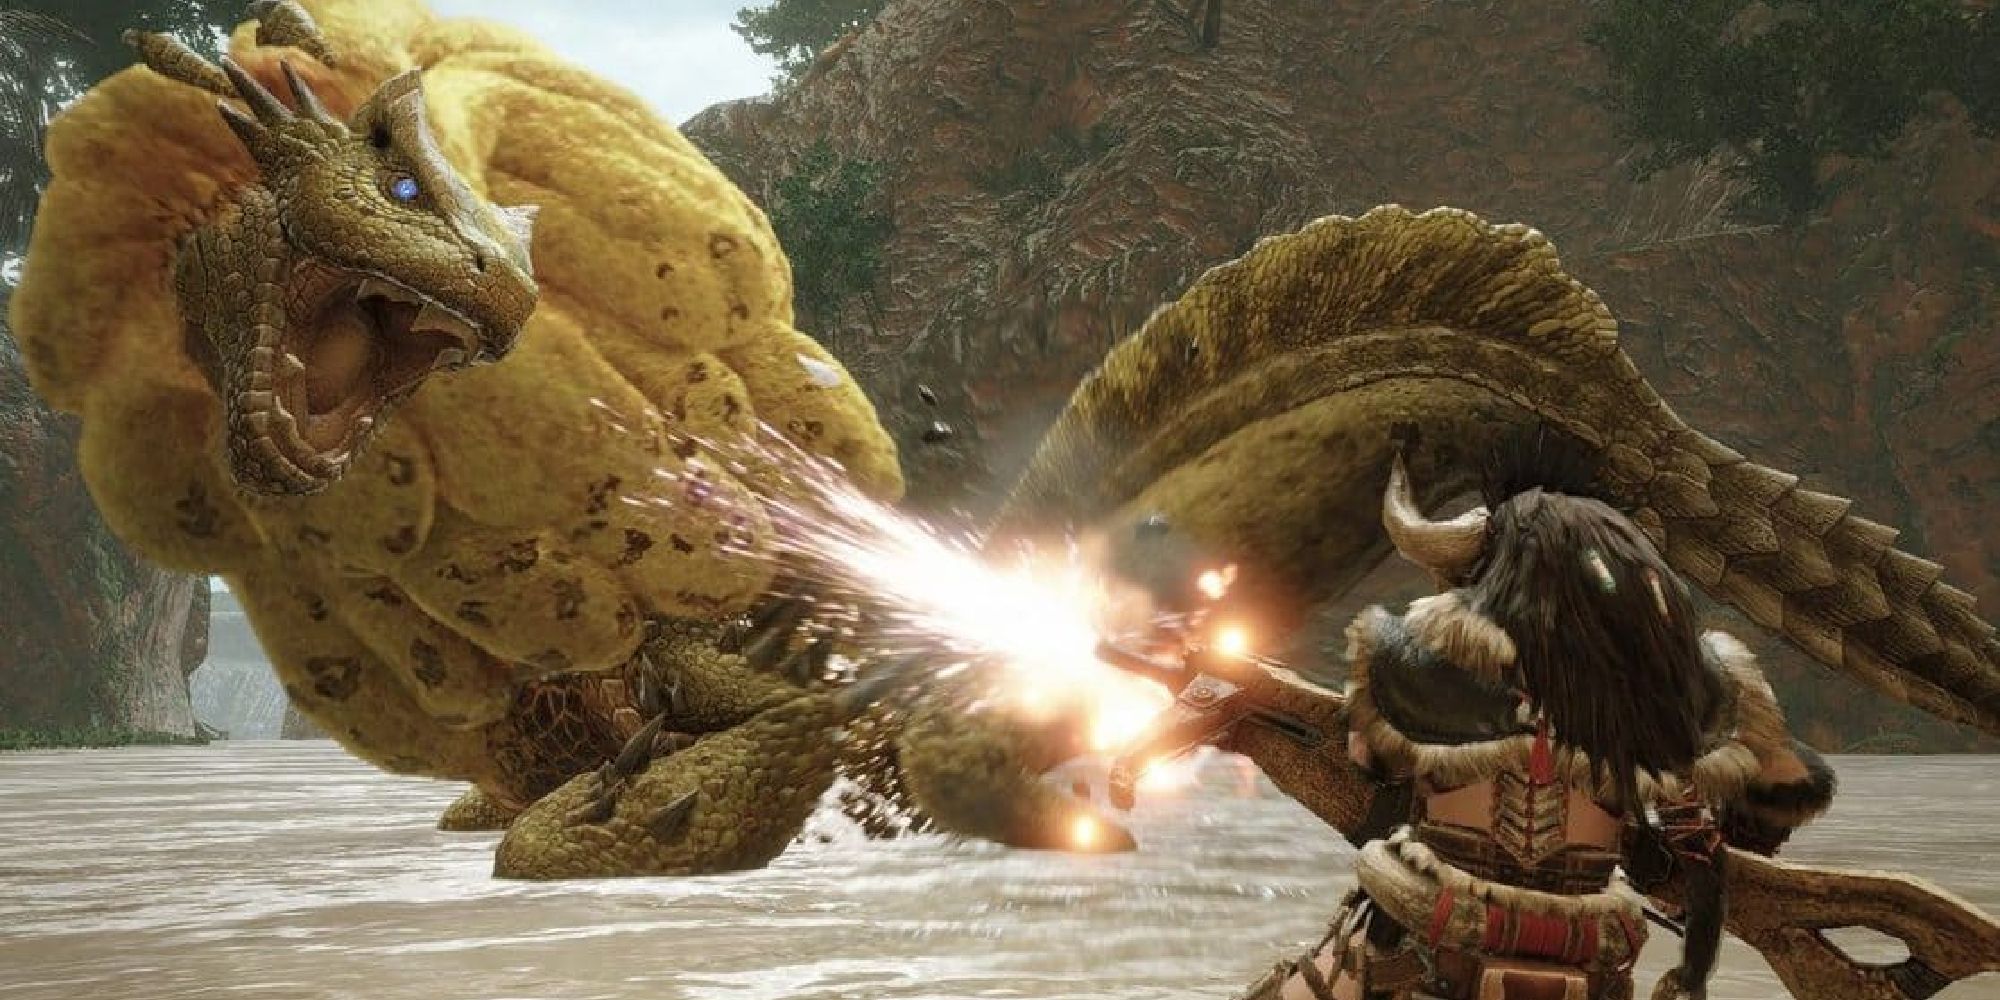 A Bowgun user firing at a Royal Ludroth in Monster Hunter Rise